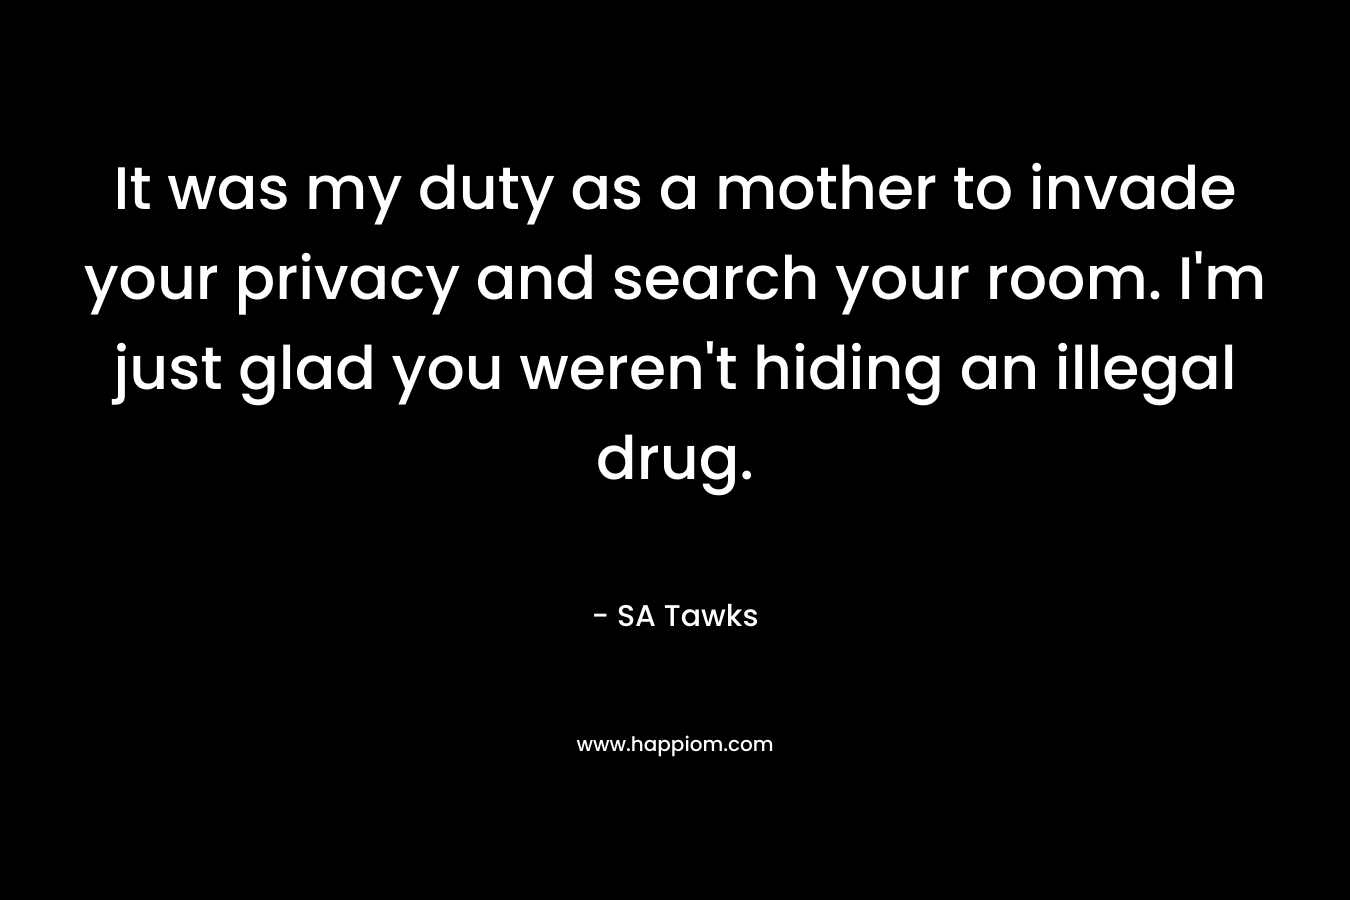 It was my duty as a mother to invade your privacy and search your room. I'm just glad you weren't hiding an illegal drug.